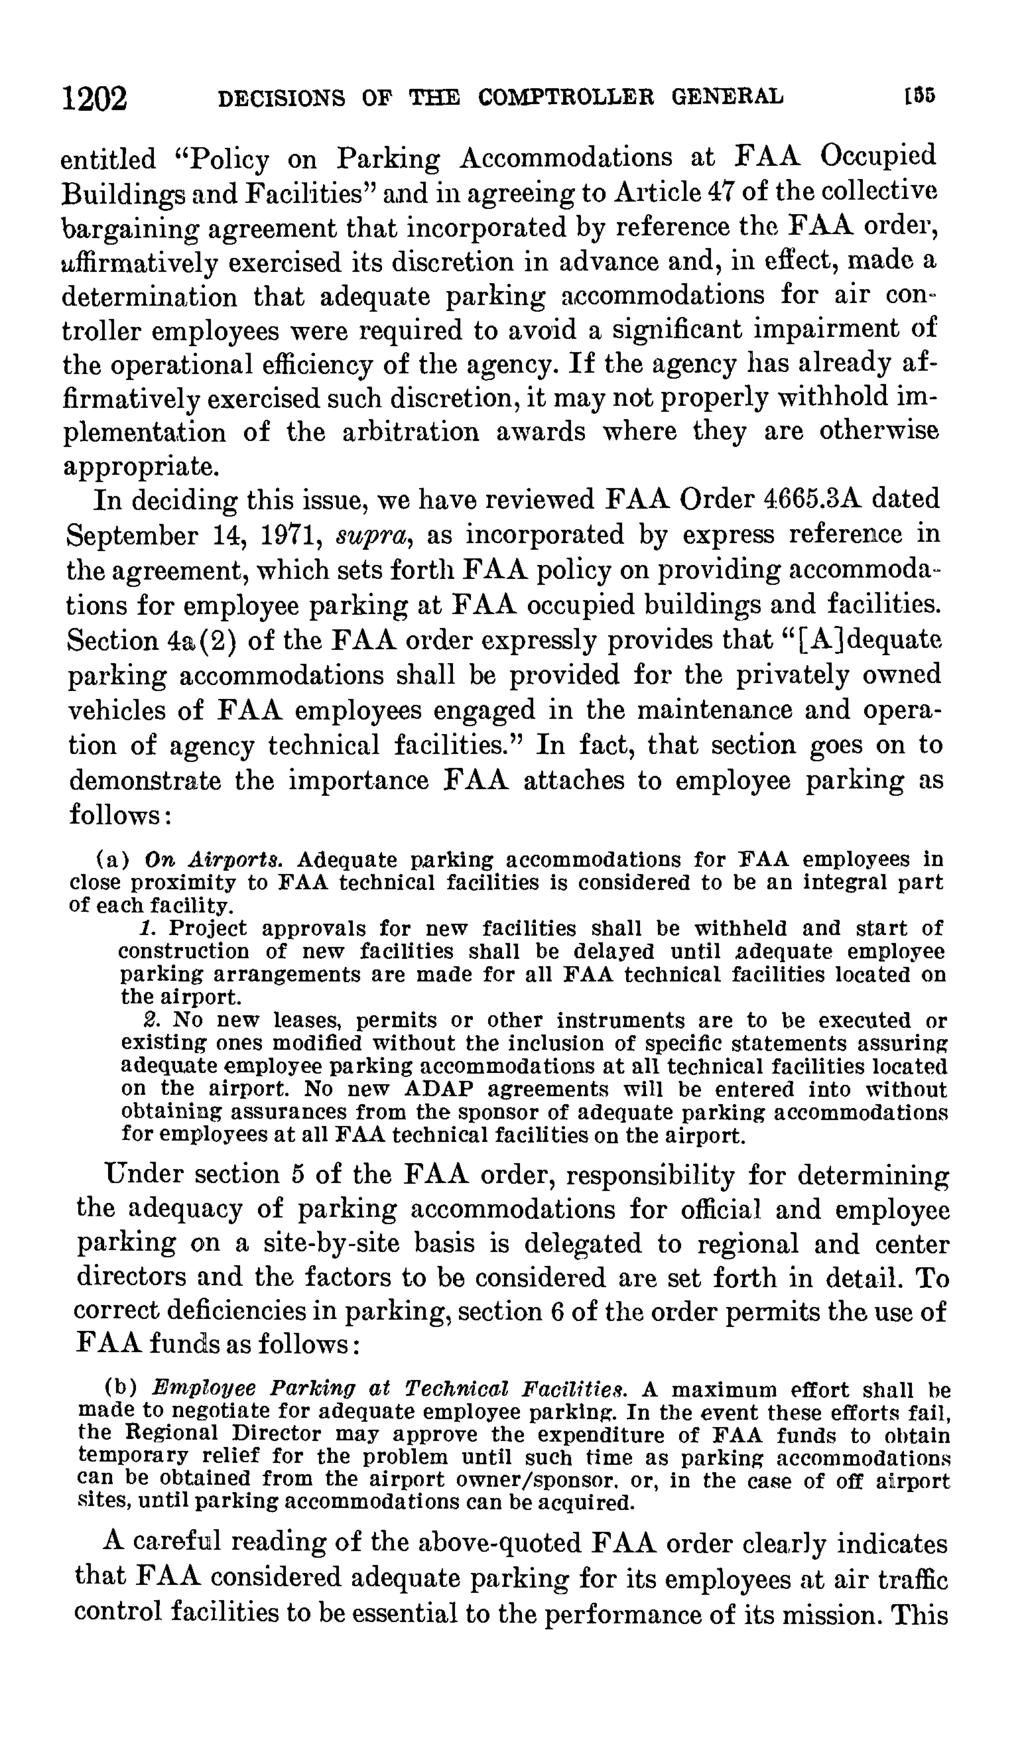 1202 DECISIONS OF THE COMPTROLLER GENERAL entitled "Policy on Parking Accommodations at FAA Occupied Buildings and Facilities" and in agreeing to Article 47 of the collective bargaining agreement